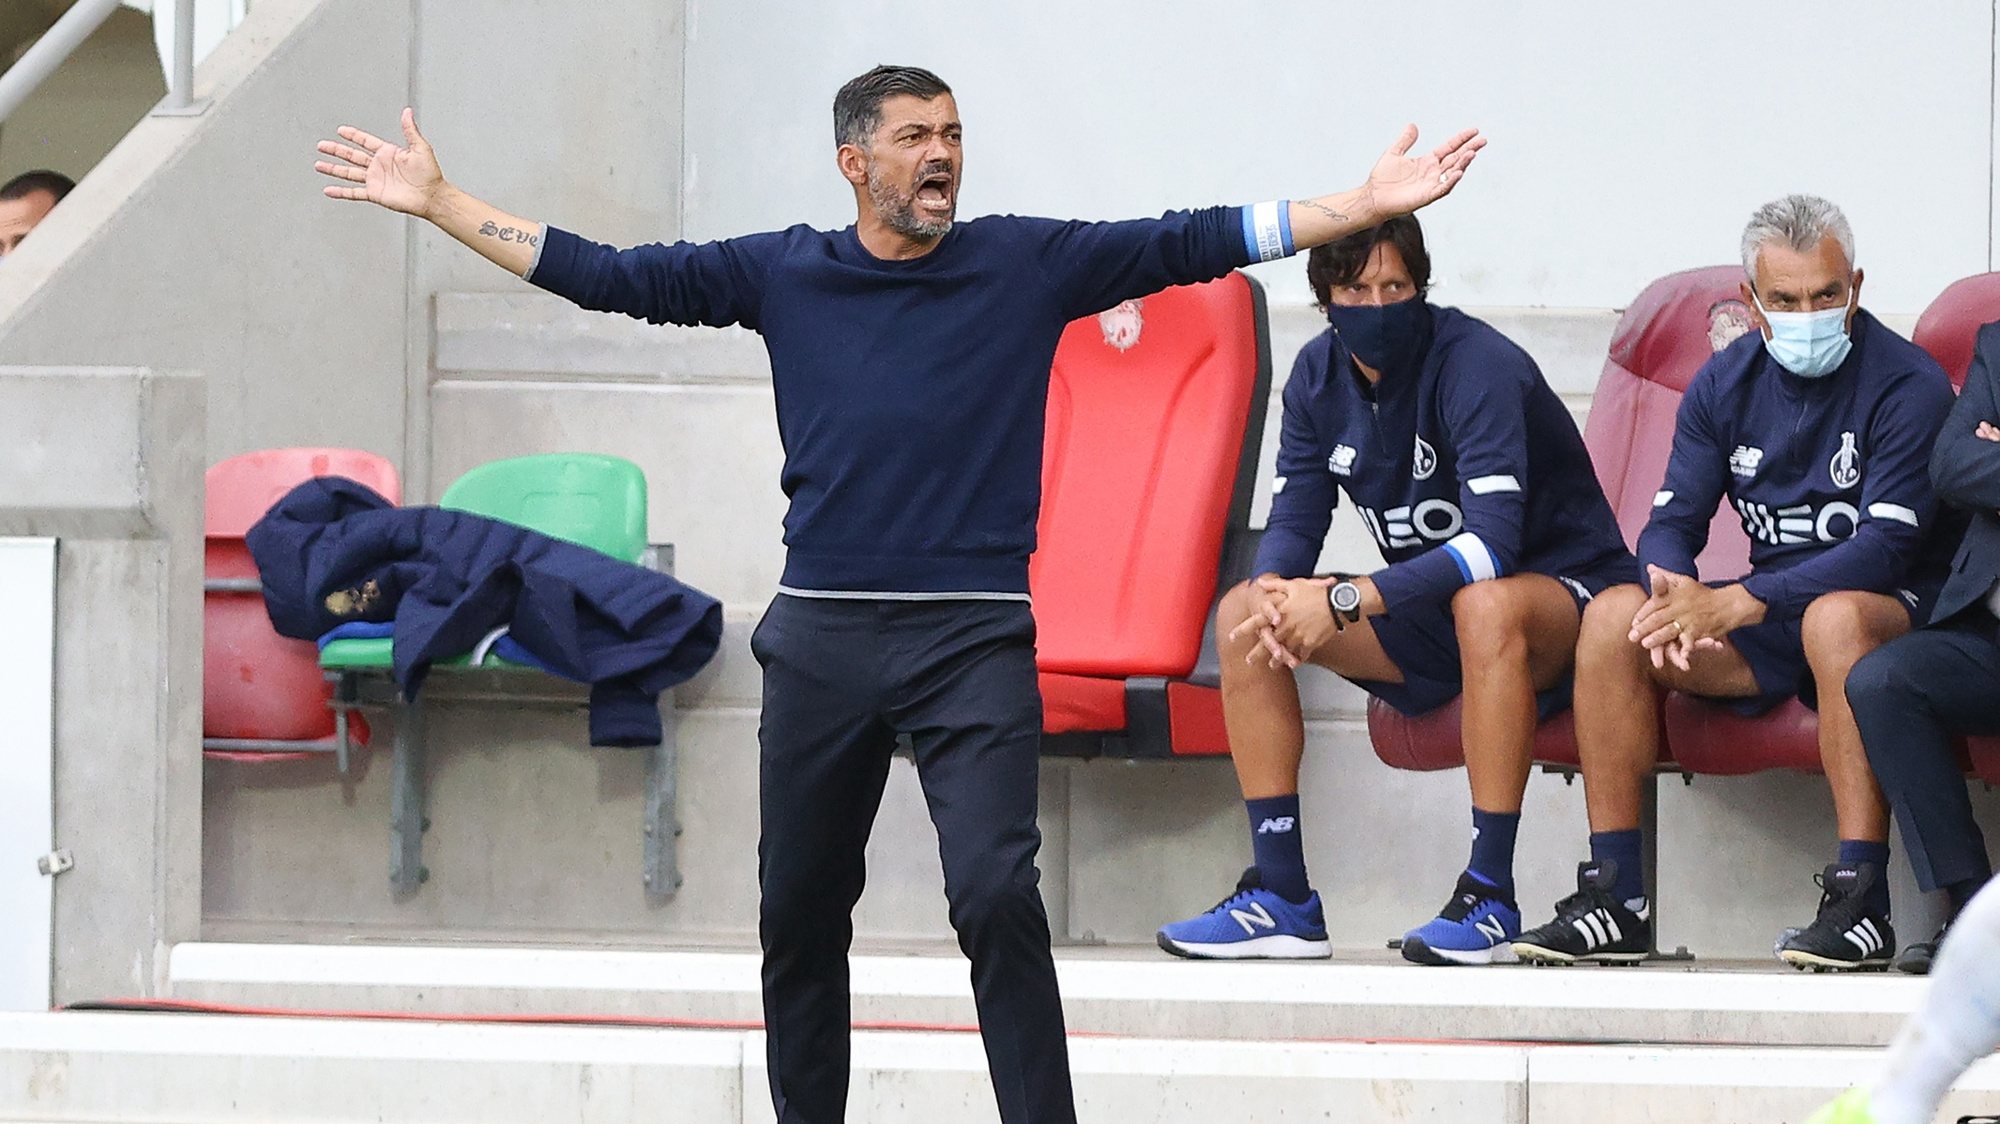 FC Porto&#039;s head coach Sergio Conceicao (L) reacts during the Portuguese First League soccer match between Maritimo and FC Porto at Maritimo&#039;s stadium in Funchal, Madeira Island, Portugal, 22 August 2021. HOMEM DE GOUVEIA/LUSA